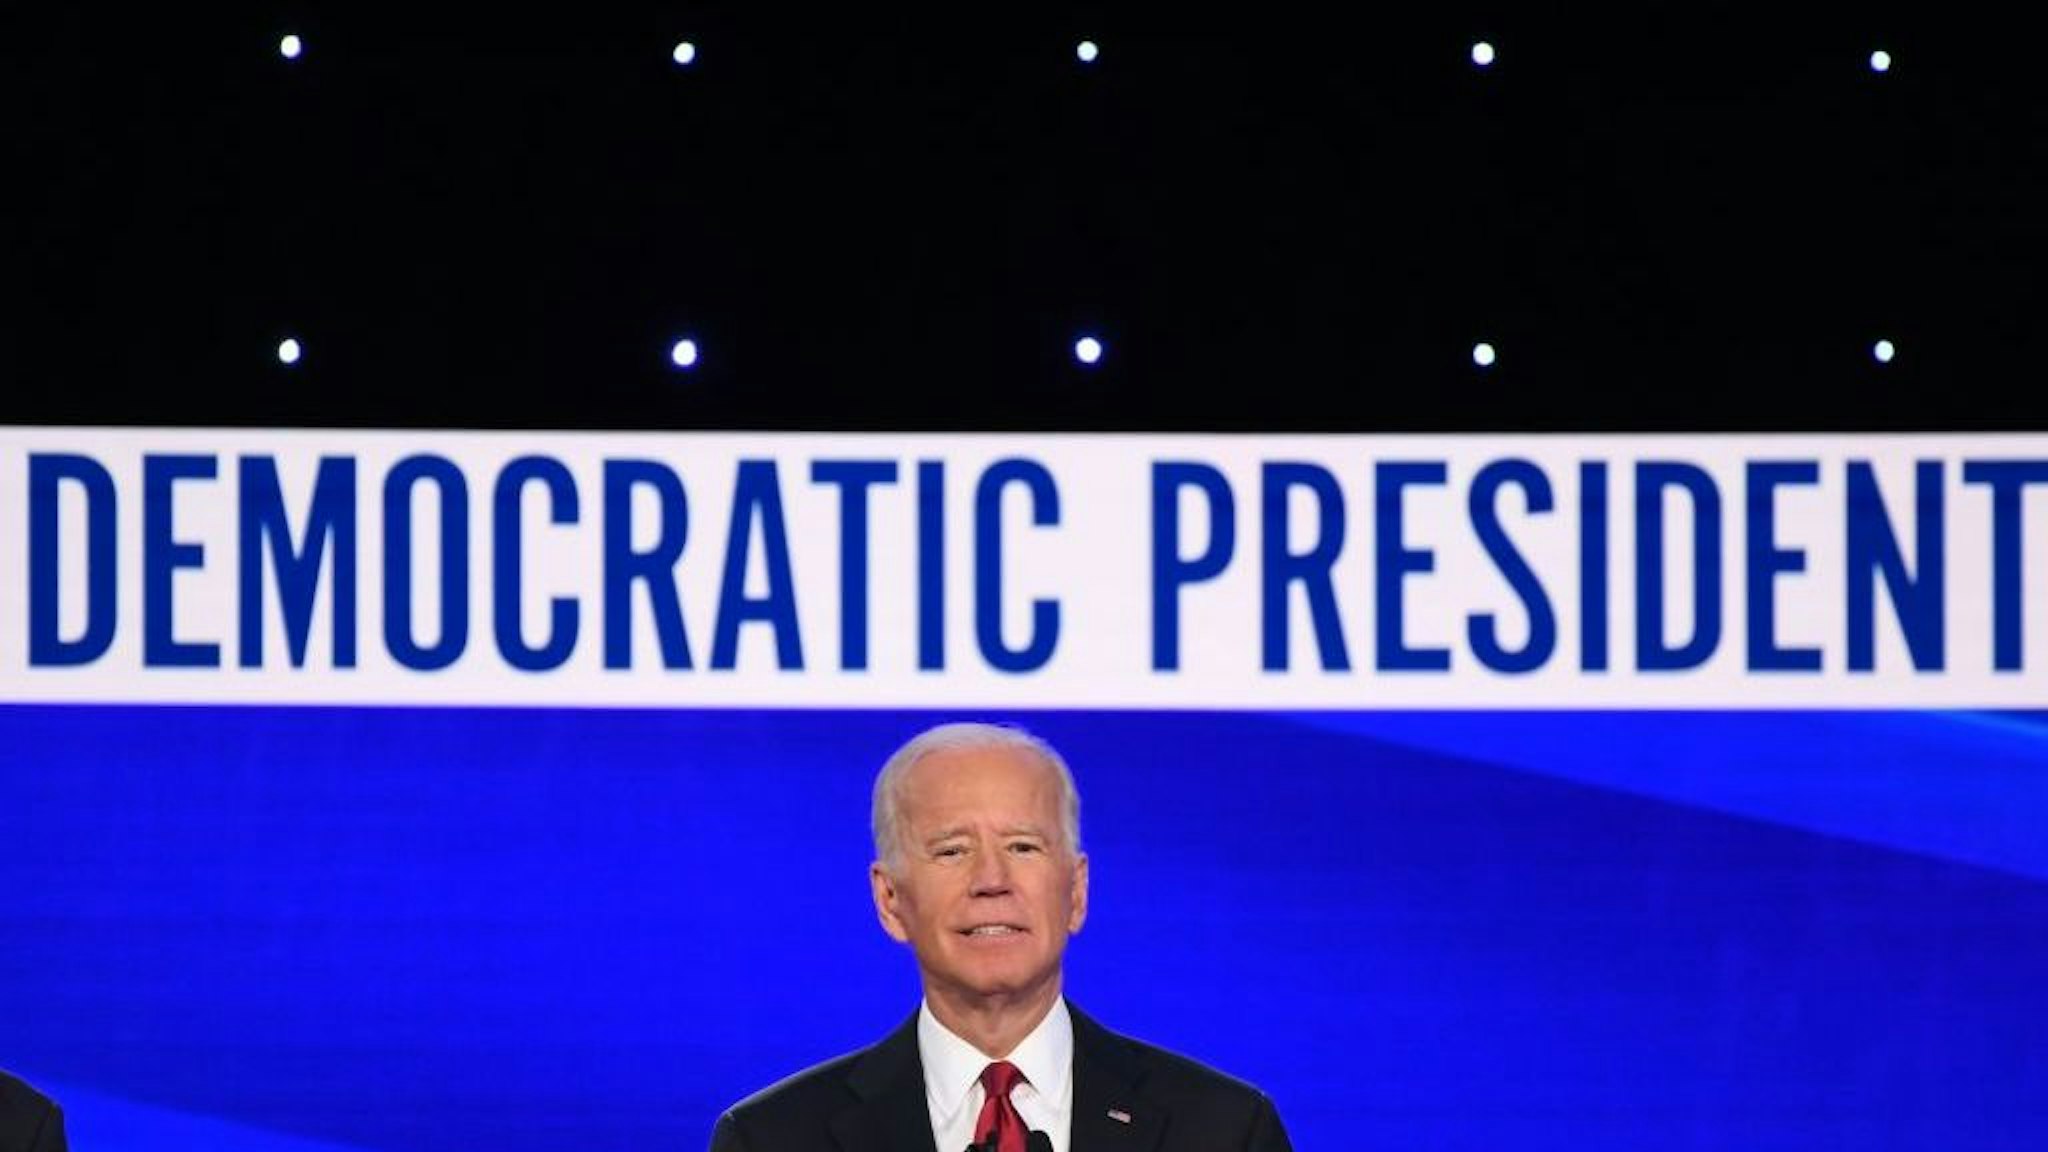 Democratic presidential hopeful former US Vice President Joe Biden gestures as he speaks during the fourth Democratic primary debate of the 2020 presidential campaign season co-hosted by The New York Times and CNN at Otterbein University in Westerville, Ohio on October 15, 2019. (Photo by SAUL LOEB / AFP)